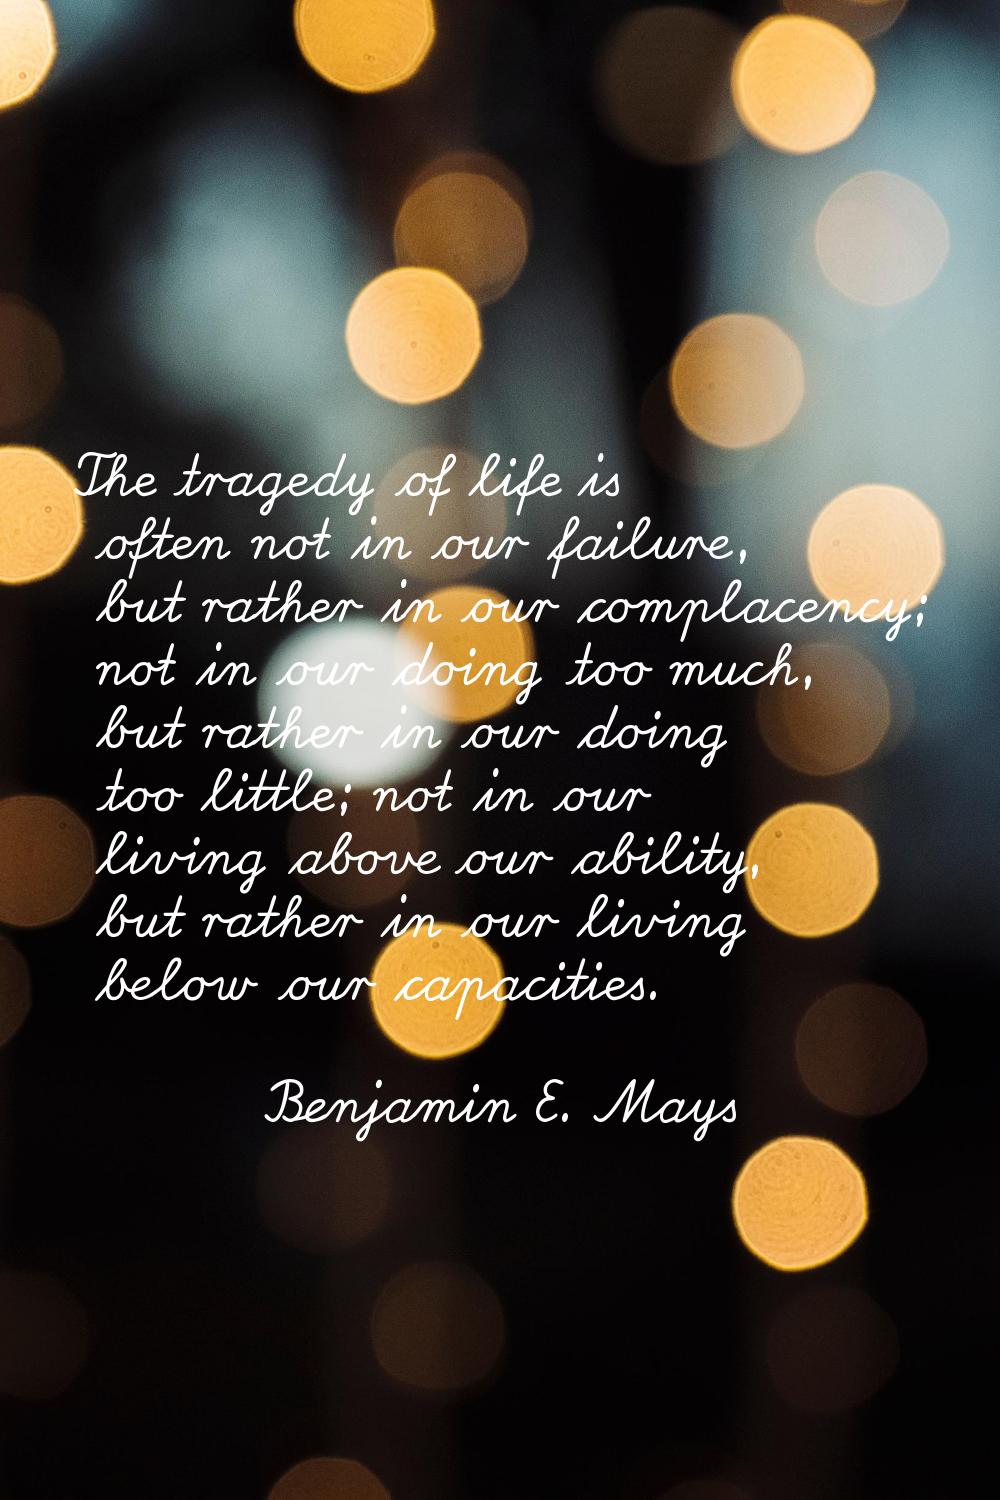 The tragedy of life is often not in our failure, but rather in our complacency; not in our doing to